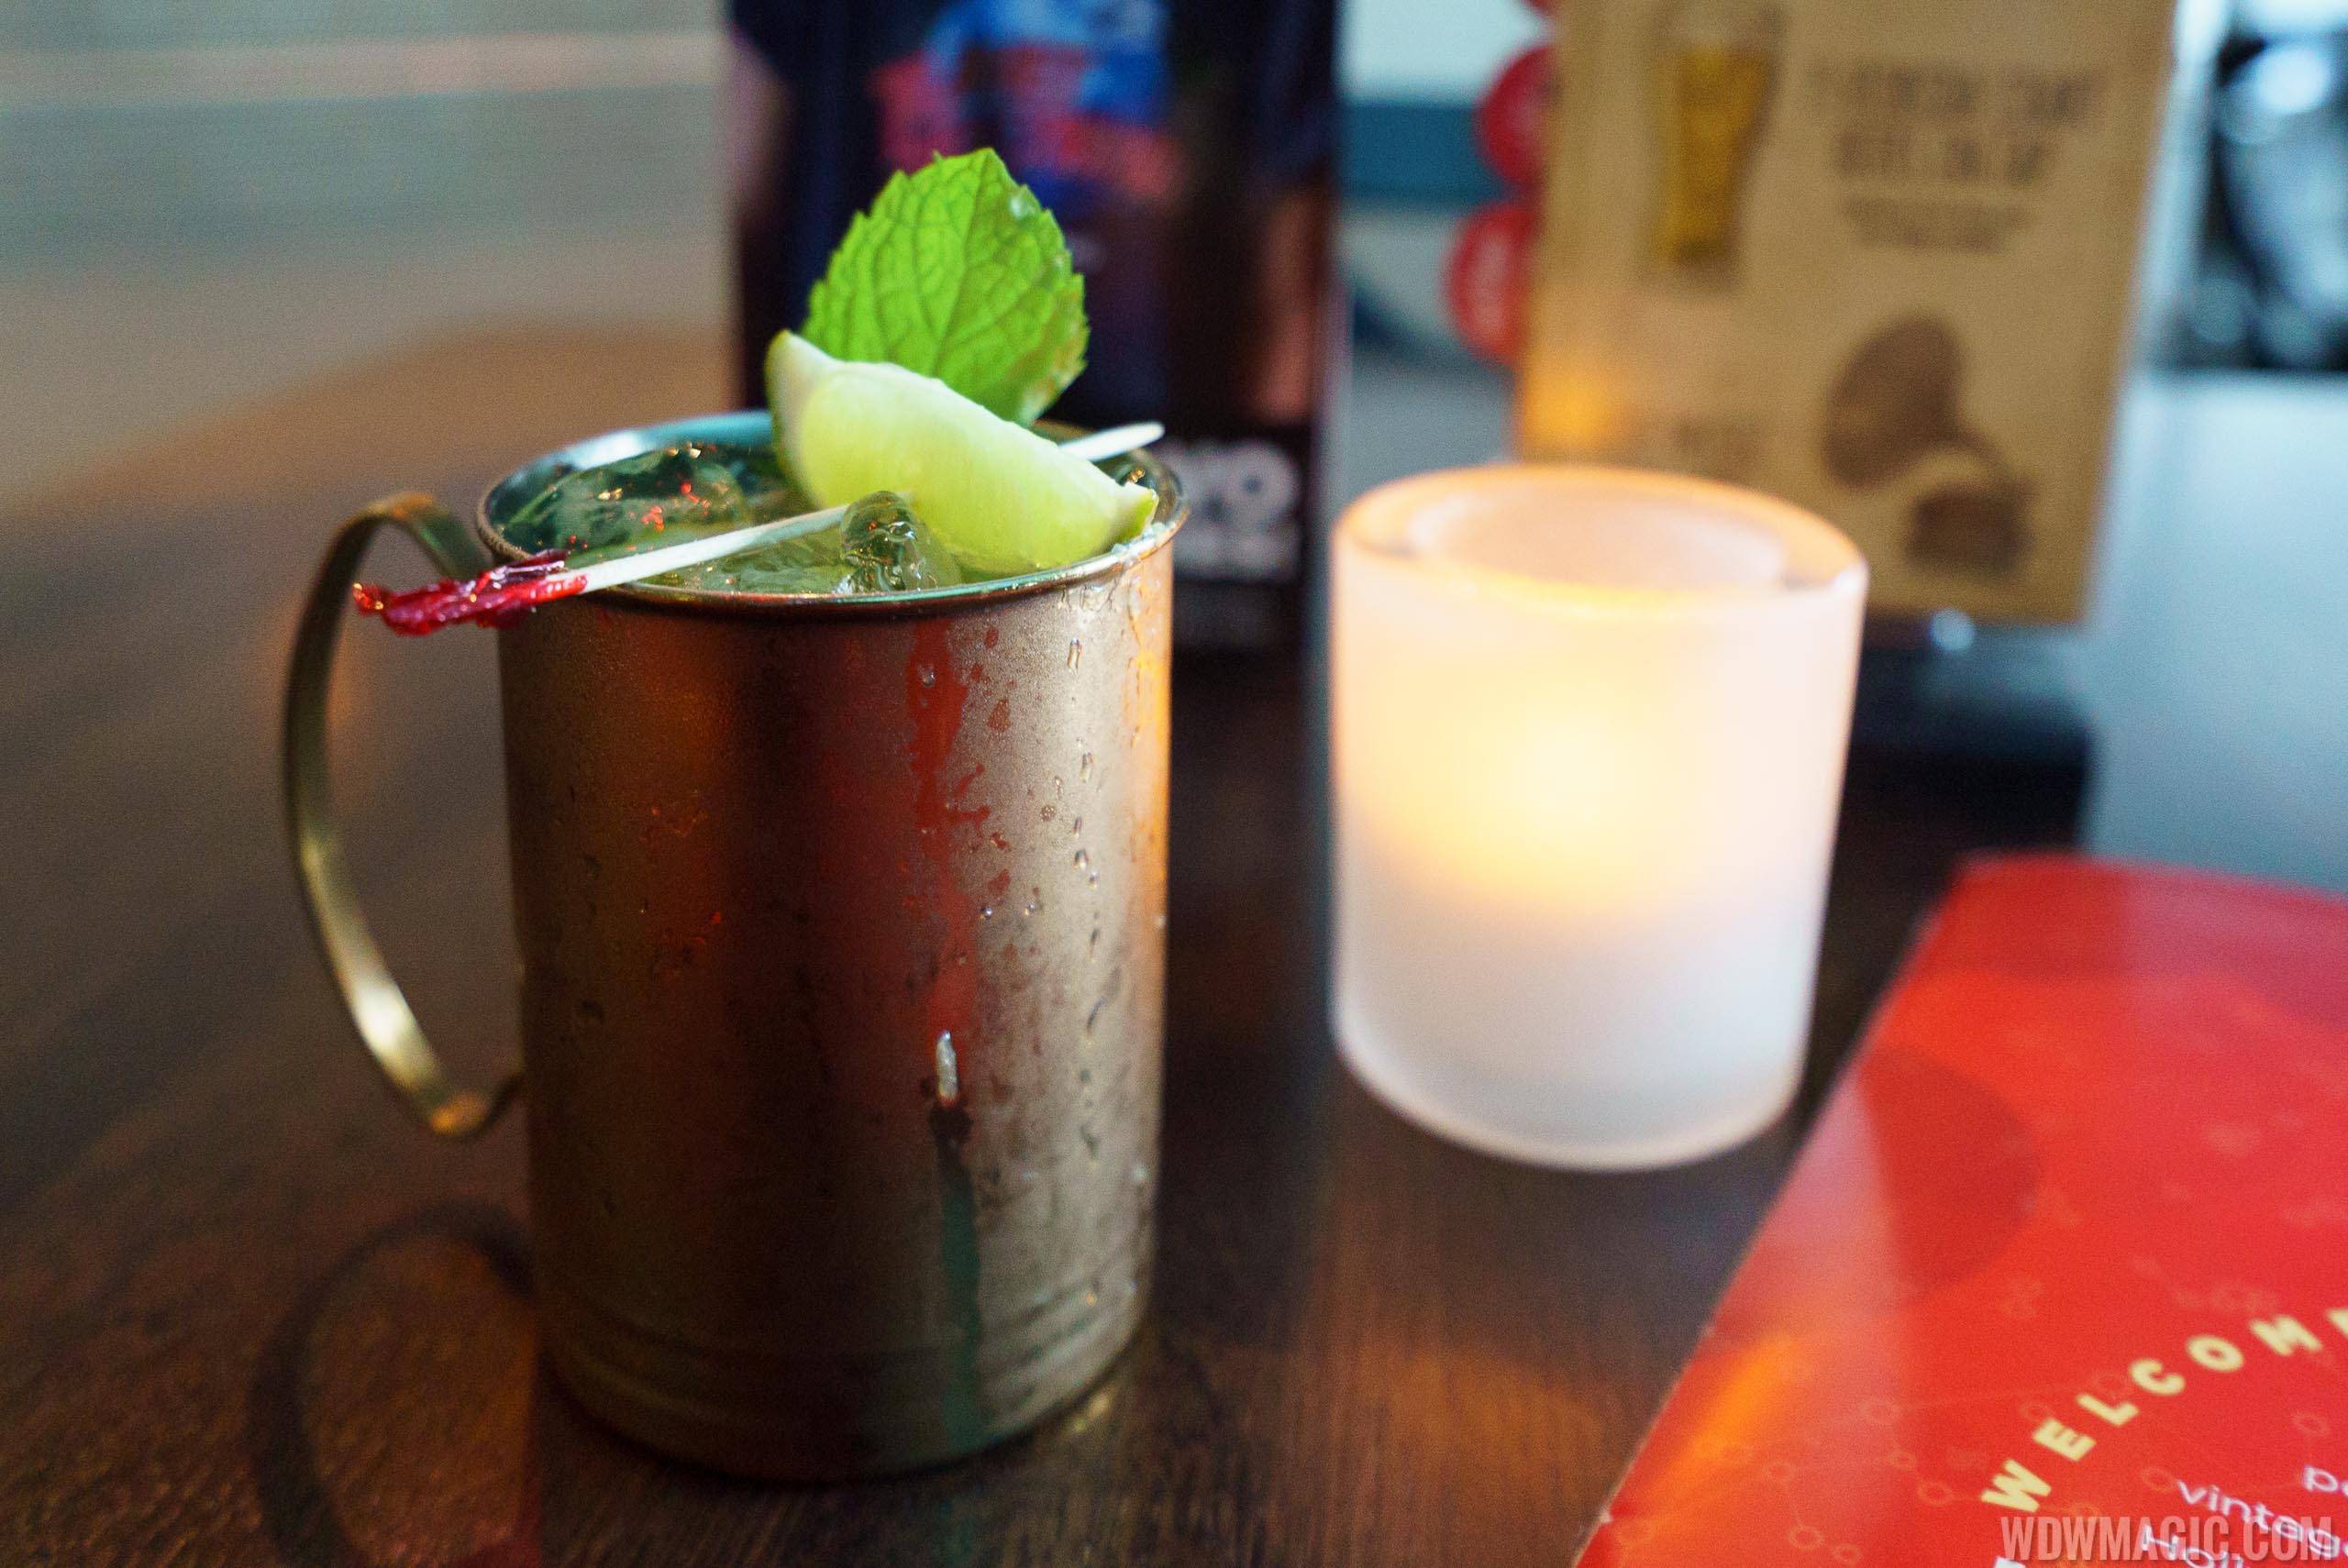 Mercury Mule - $12 New Amsterdam Vodka, Limoncino Bottega and Real ginger infused syrup